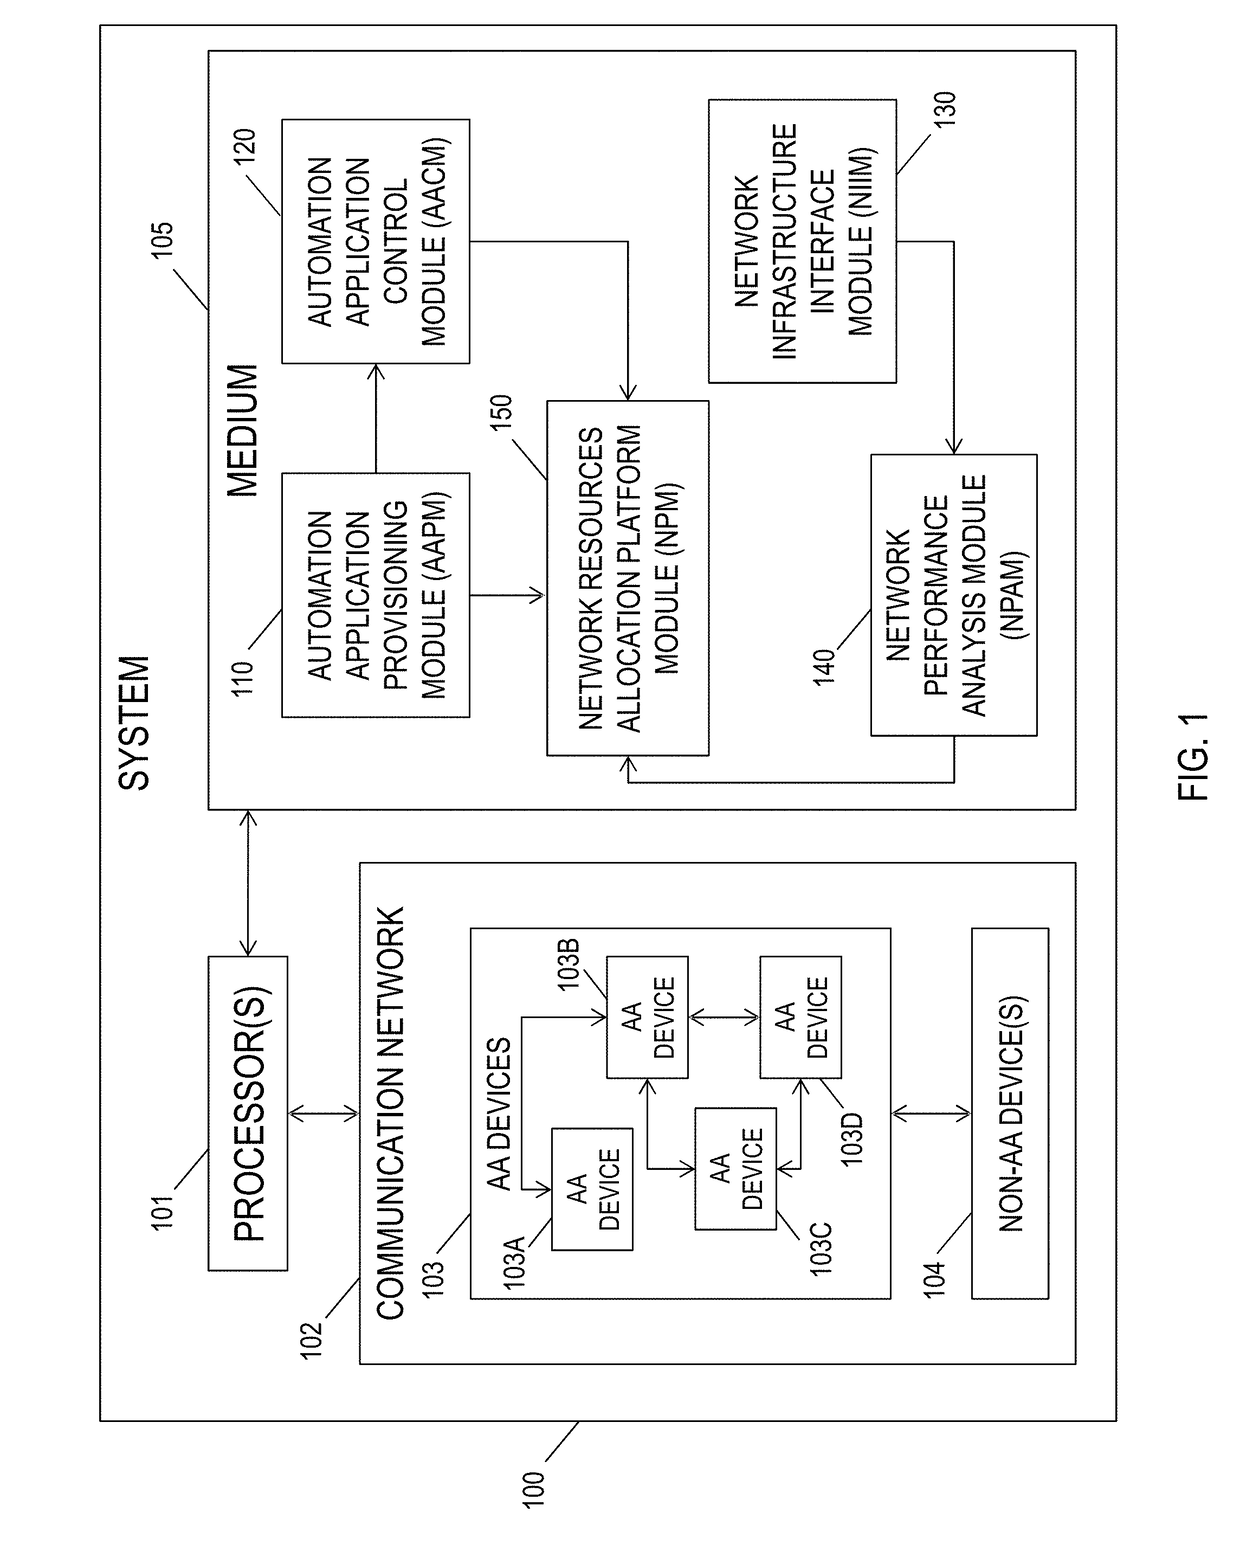 Systems, methods, and computer medium to provide adaptive priority scheduling of communications over a network and dynamic resources allocation among devices within the network